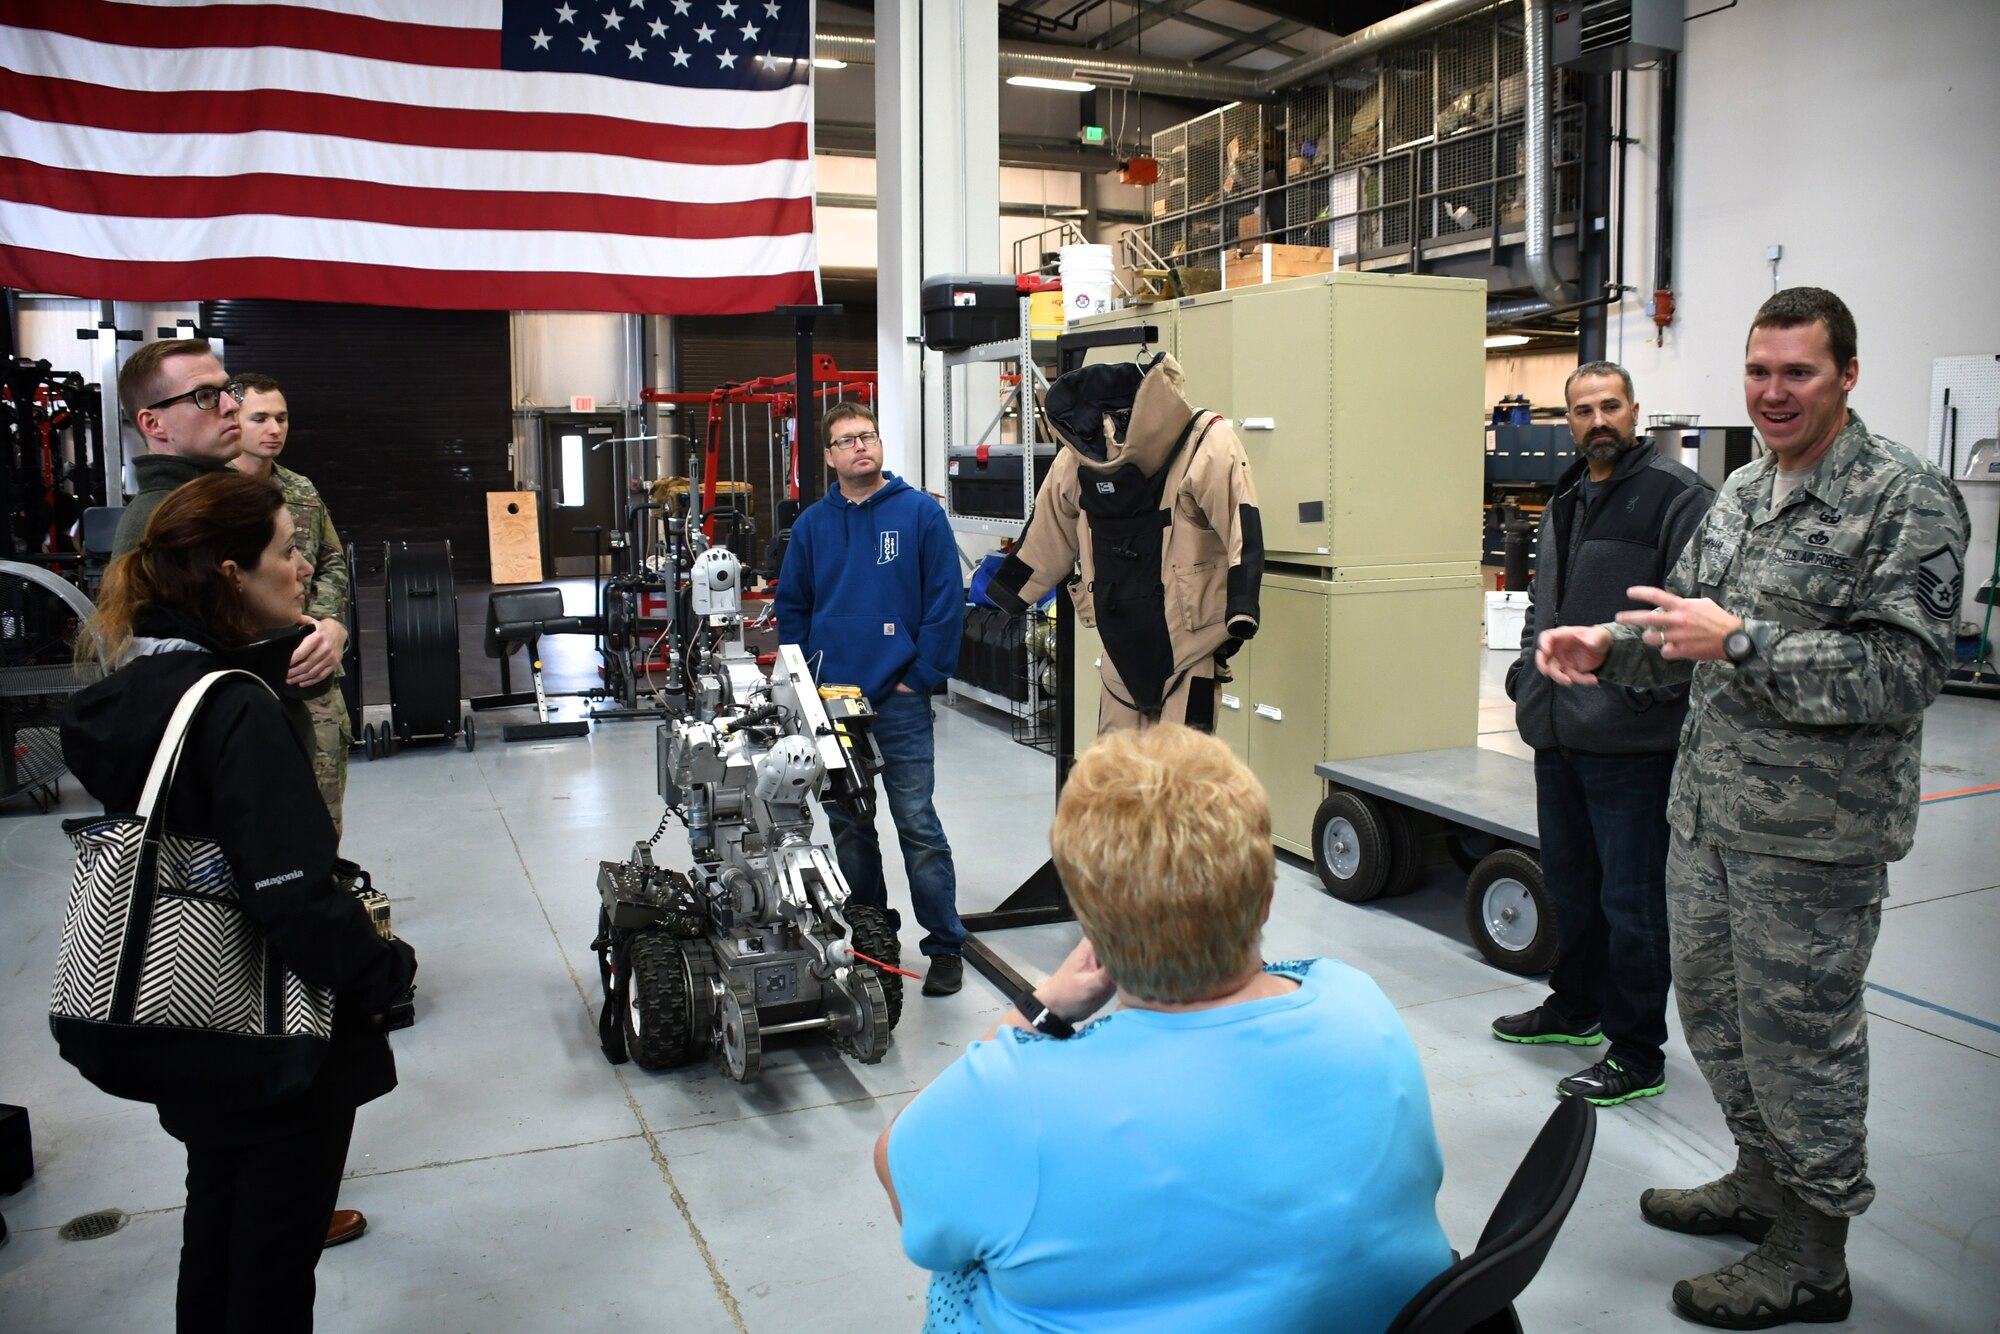 Master Sgt. David Pinkham answers questions about the training requirements of explosive ordnance disposal (EOD) specialists and various tools they use, like the remote-controlled robot at center.  The visit took place during the annual Boss Day tour at the 932nd Airlift Wing, October 13, 2018 at Scott Air Force Base, Ill. Pinkham is an explosive ordnance disposal (EOD) specialist assigned to the 932nd Civil Engineer Squadron. Boss Day helps civilian employers better understand the Air Force Reserve mission and strengthens the employer-reservist relationship. The 932nd AW is made up of four core groups including the 932nd Maintenance Group, Medical Group, Mission Support Group, and Operations Group.  The Illinois unit is the only Air Force Reserve Command wing, attached to 22nd Air Force, that flies the C-40C. 
(U.S. Air Force photo by Lt. Col. Stan Paregien)